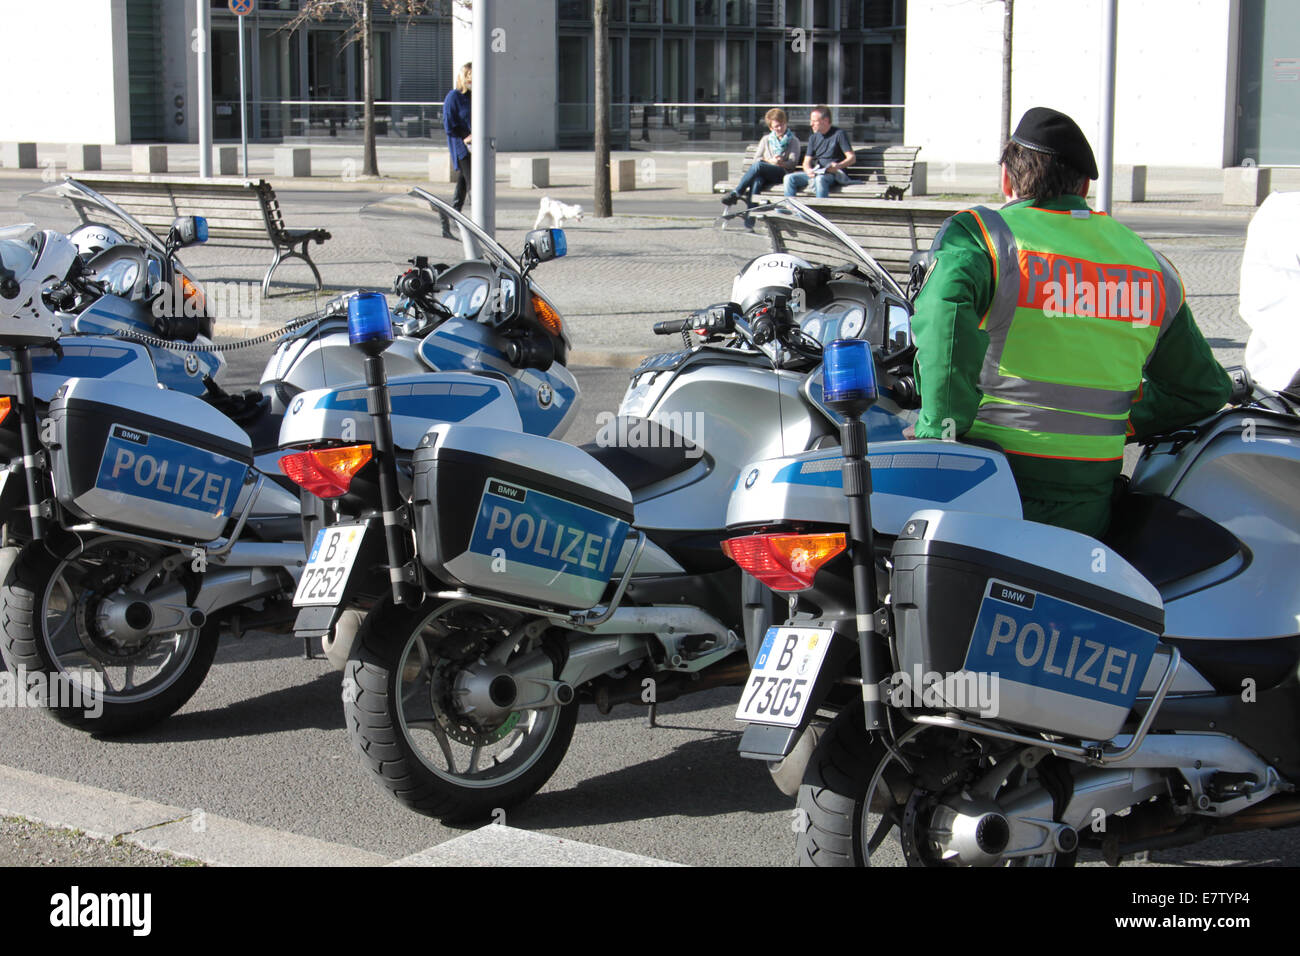 german-police-polizei-with-motorcycles-E7TYP4.jpg